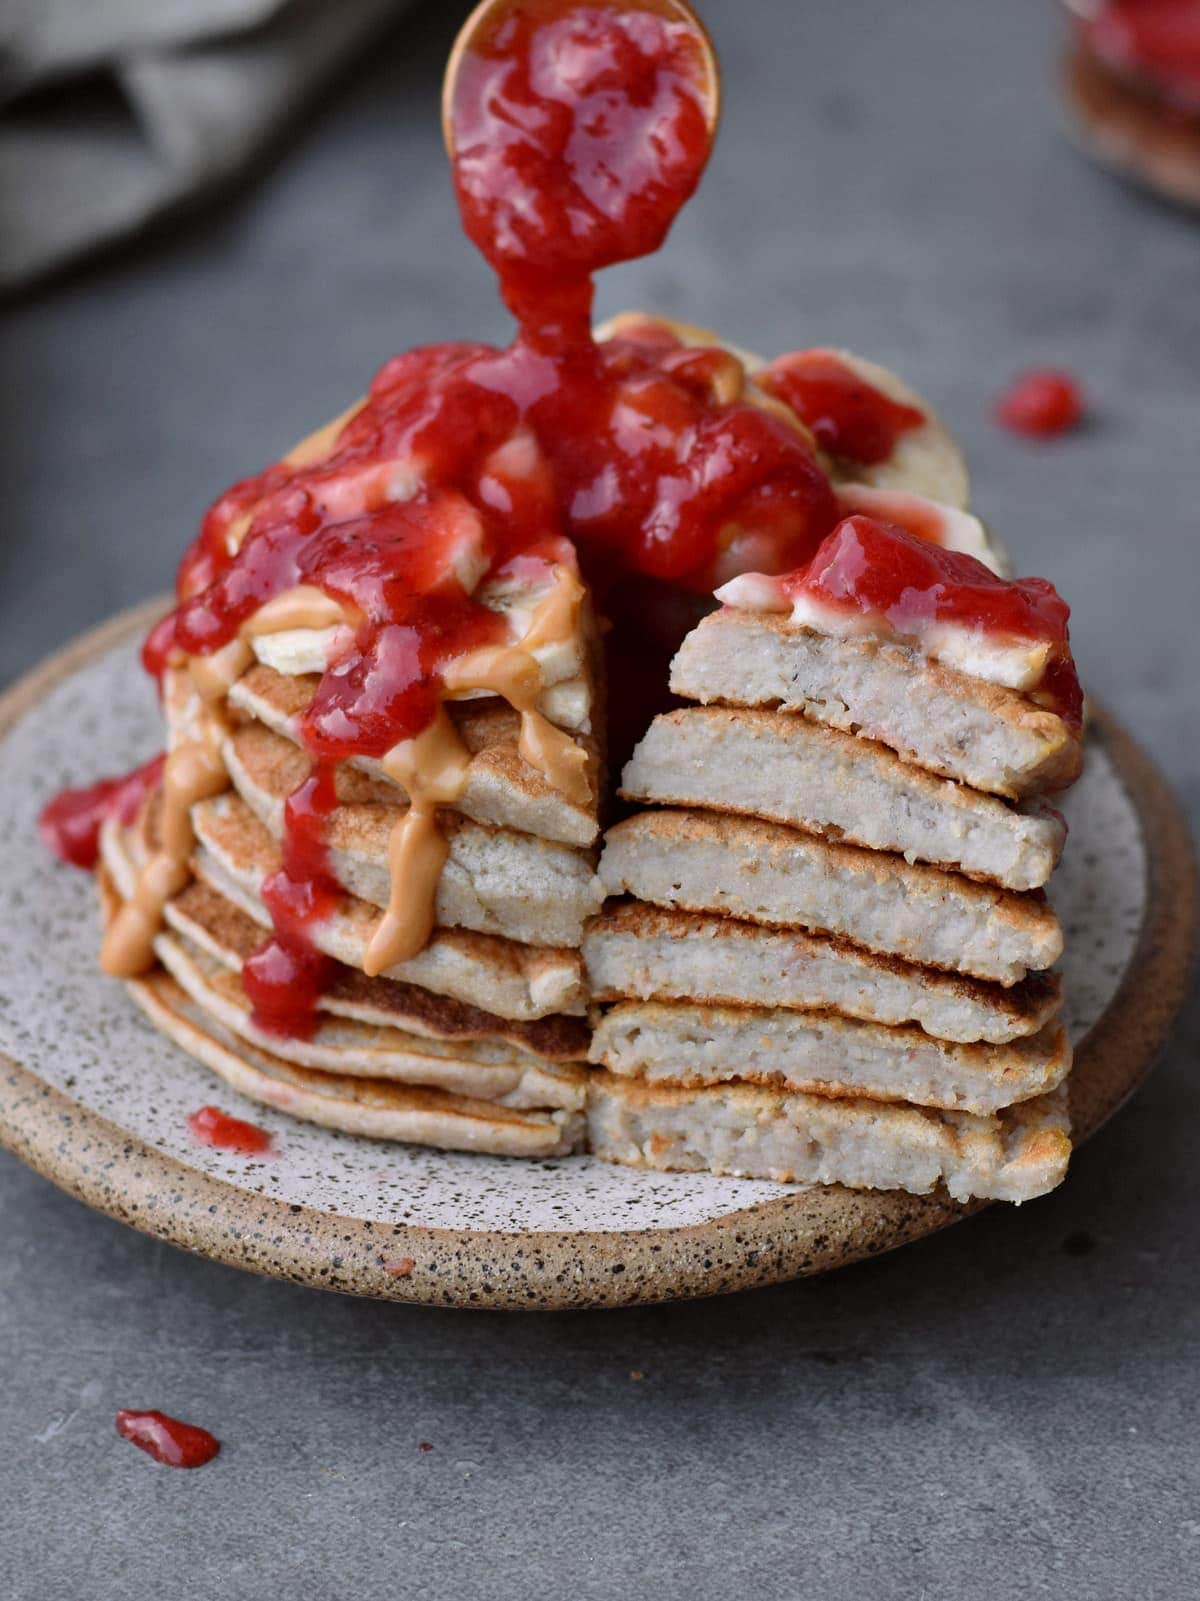 Pancake tower with a piece cut out with strawberry sauce drizzle